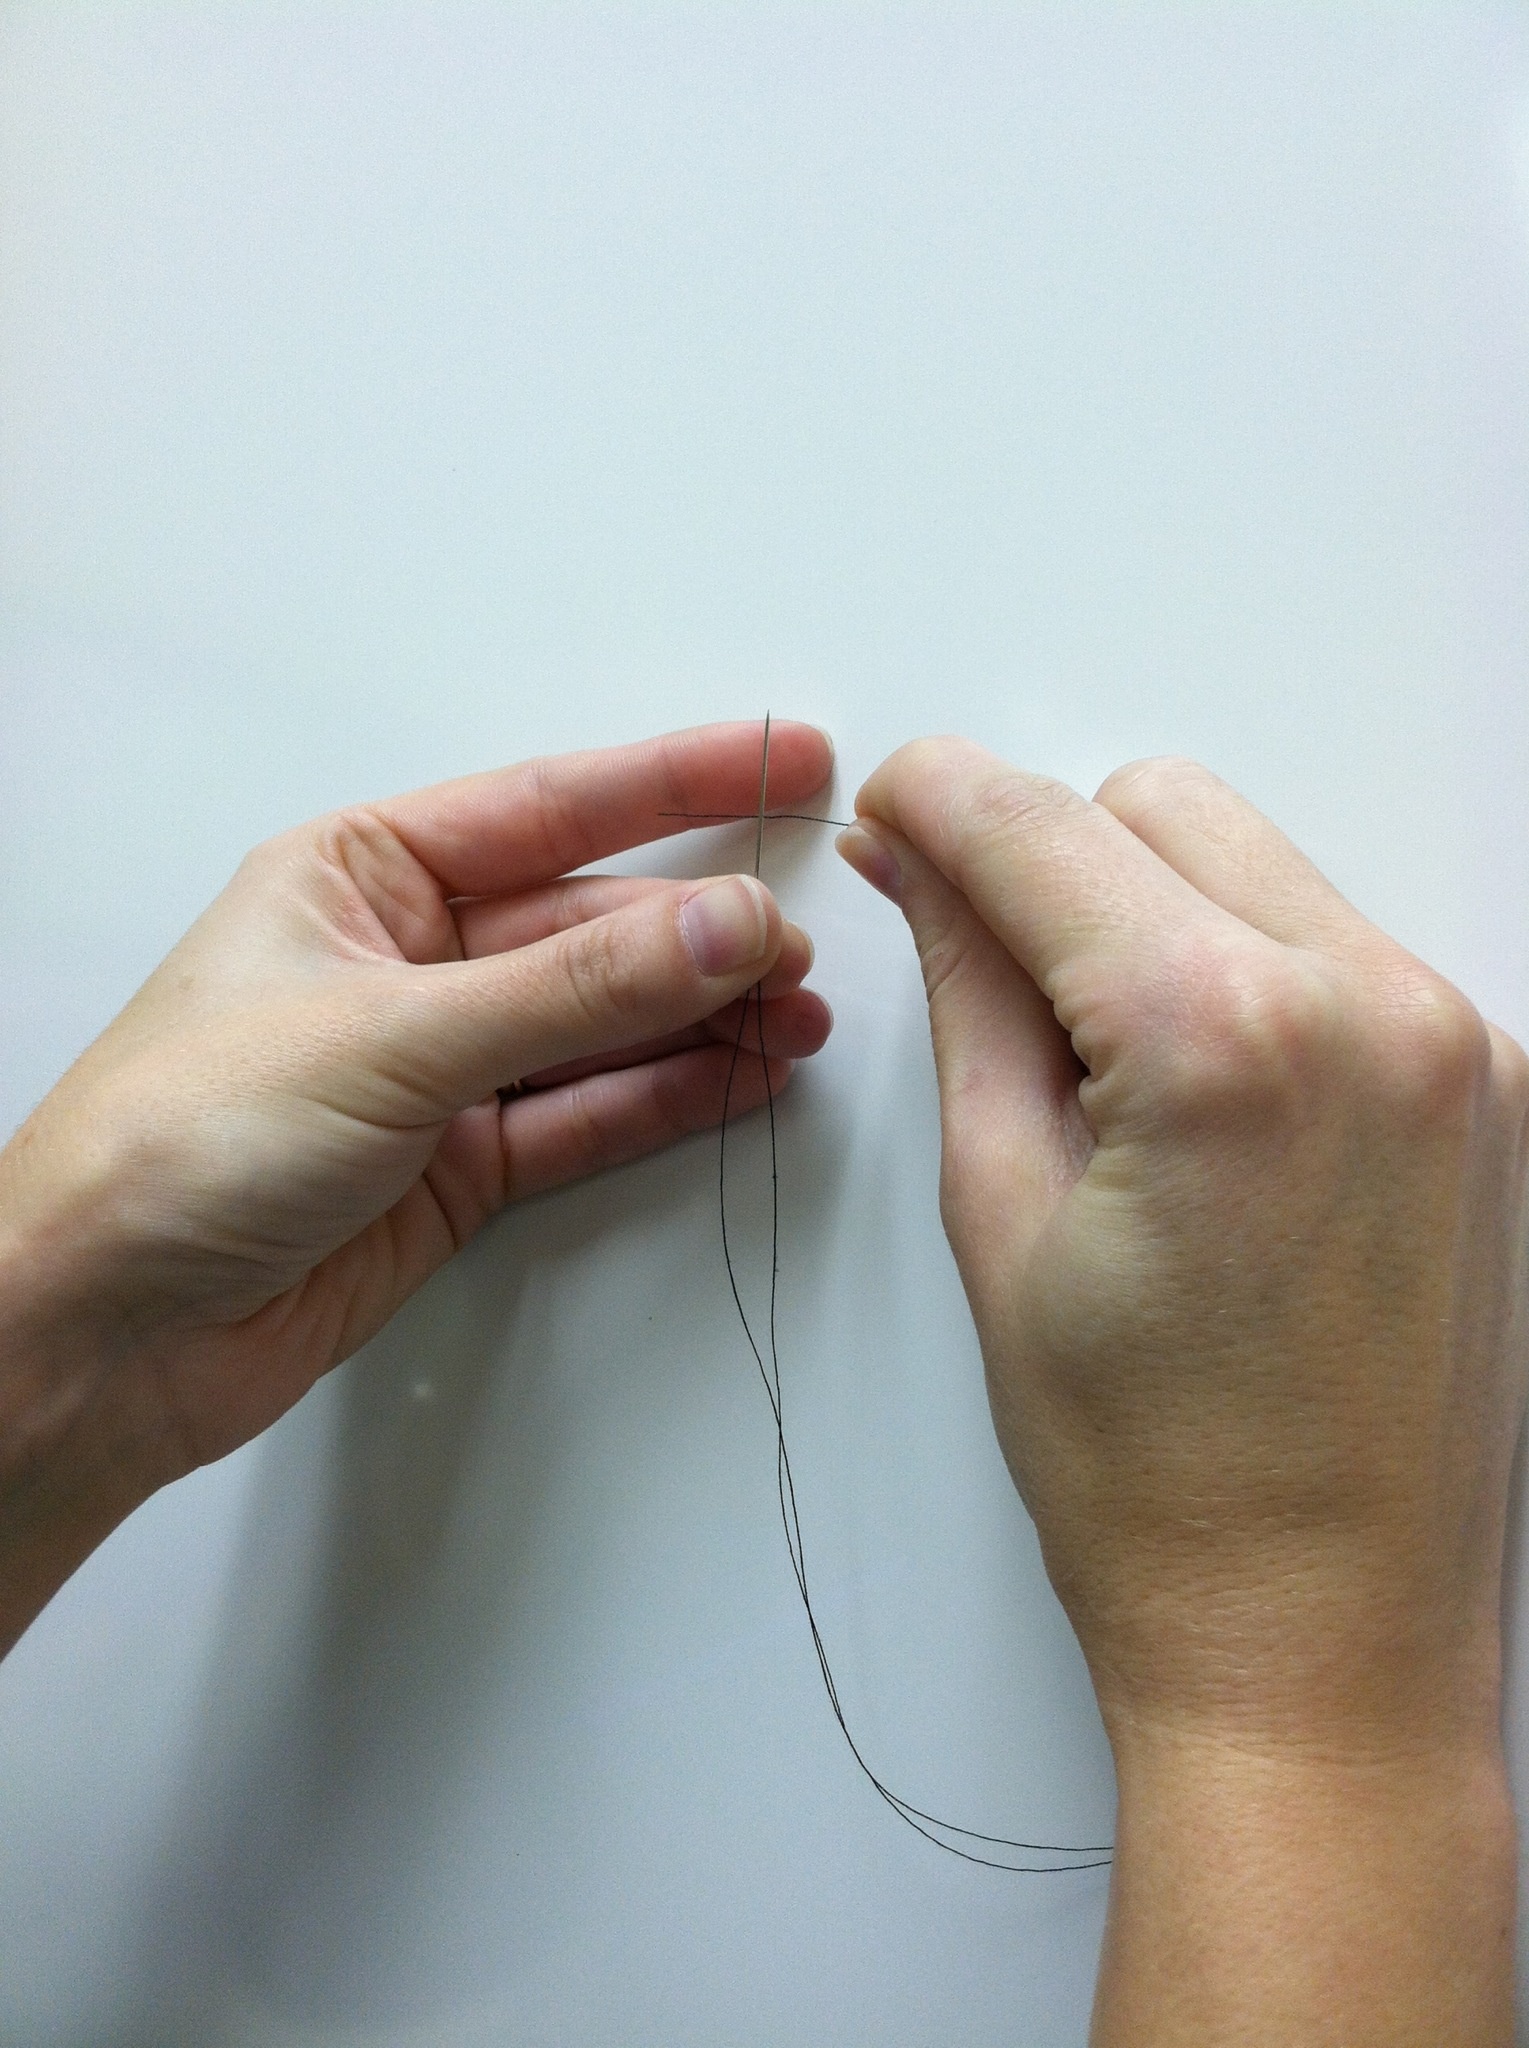 How to Thread a Needle & Tie a Knot